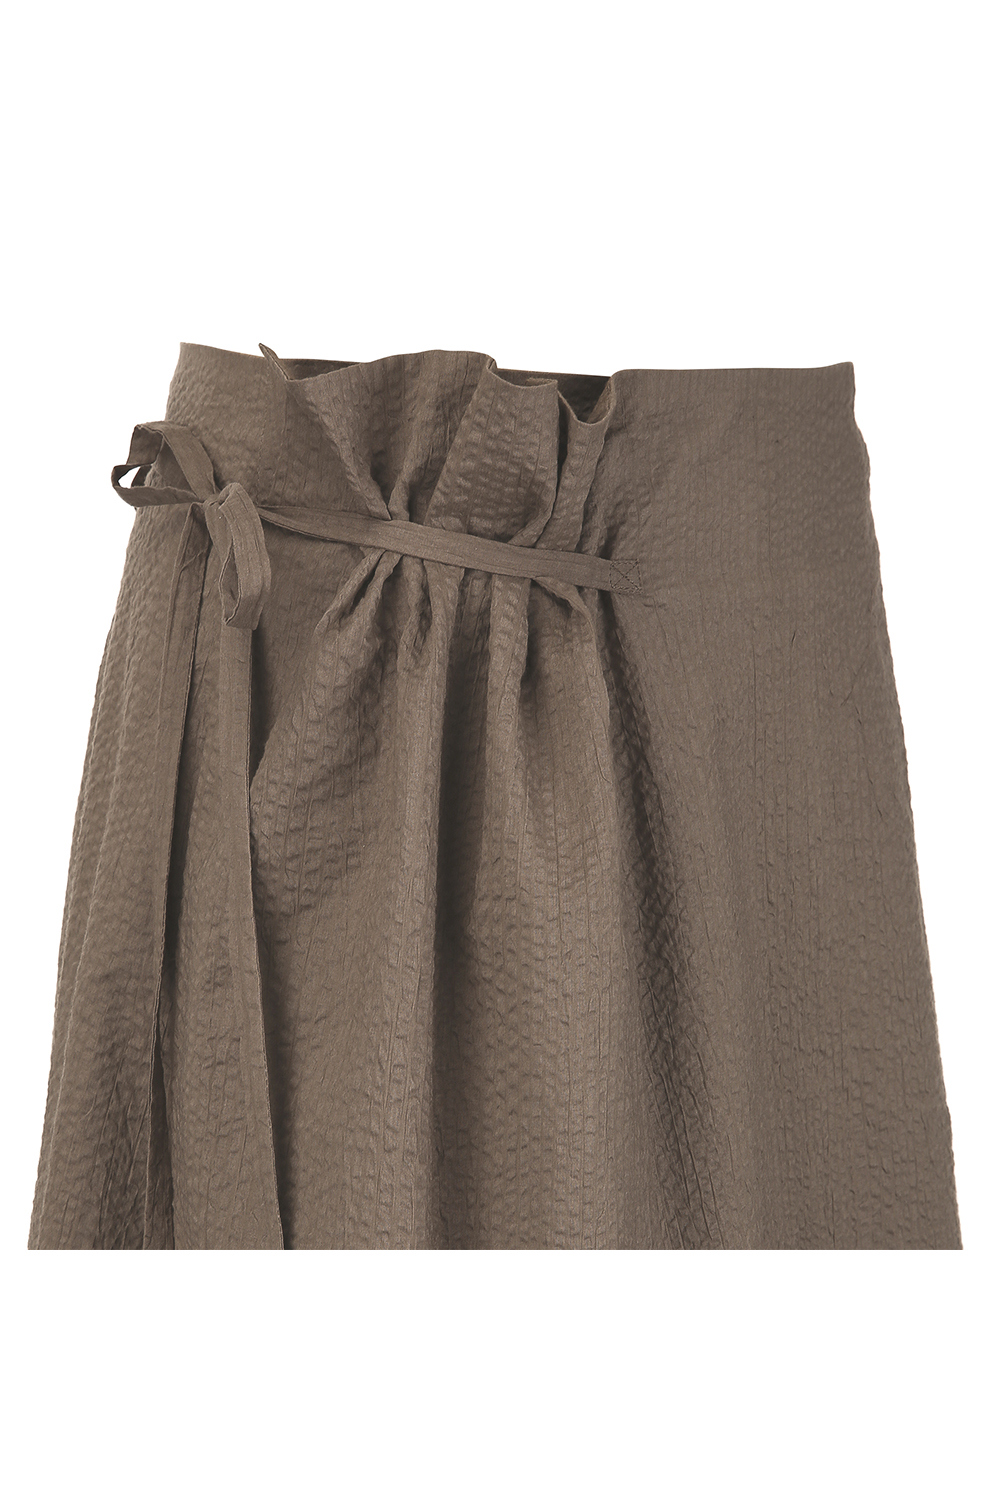 skirt oatmeal color image-S1L10